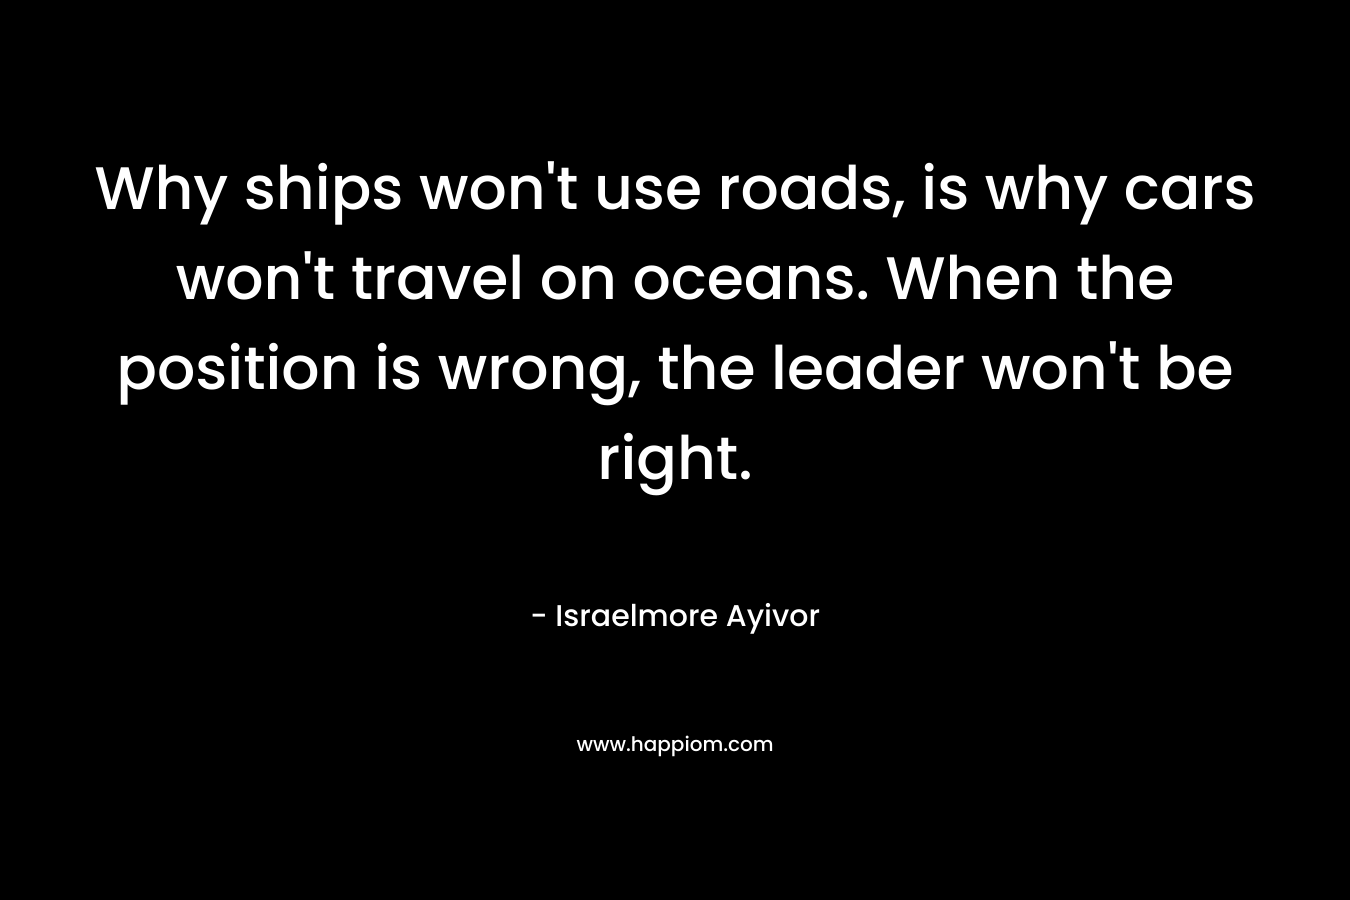 Why ships won't use roads, is why cars won't travel on oceans. When the position is wrong, the leader won't be right.